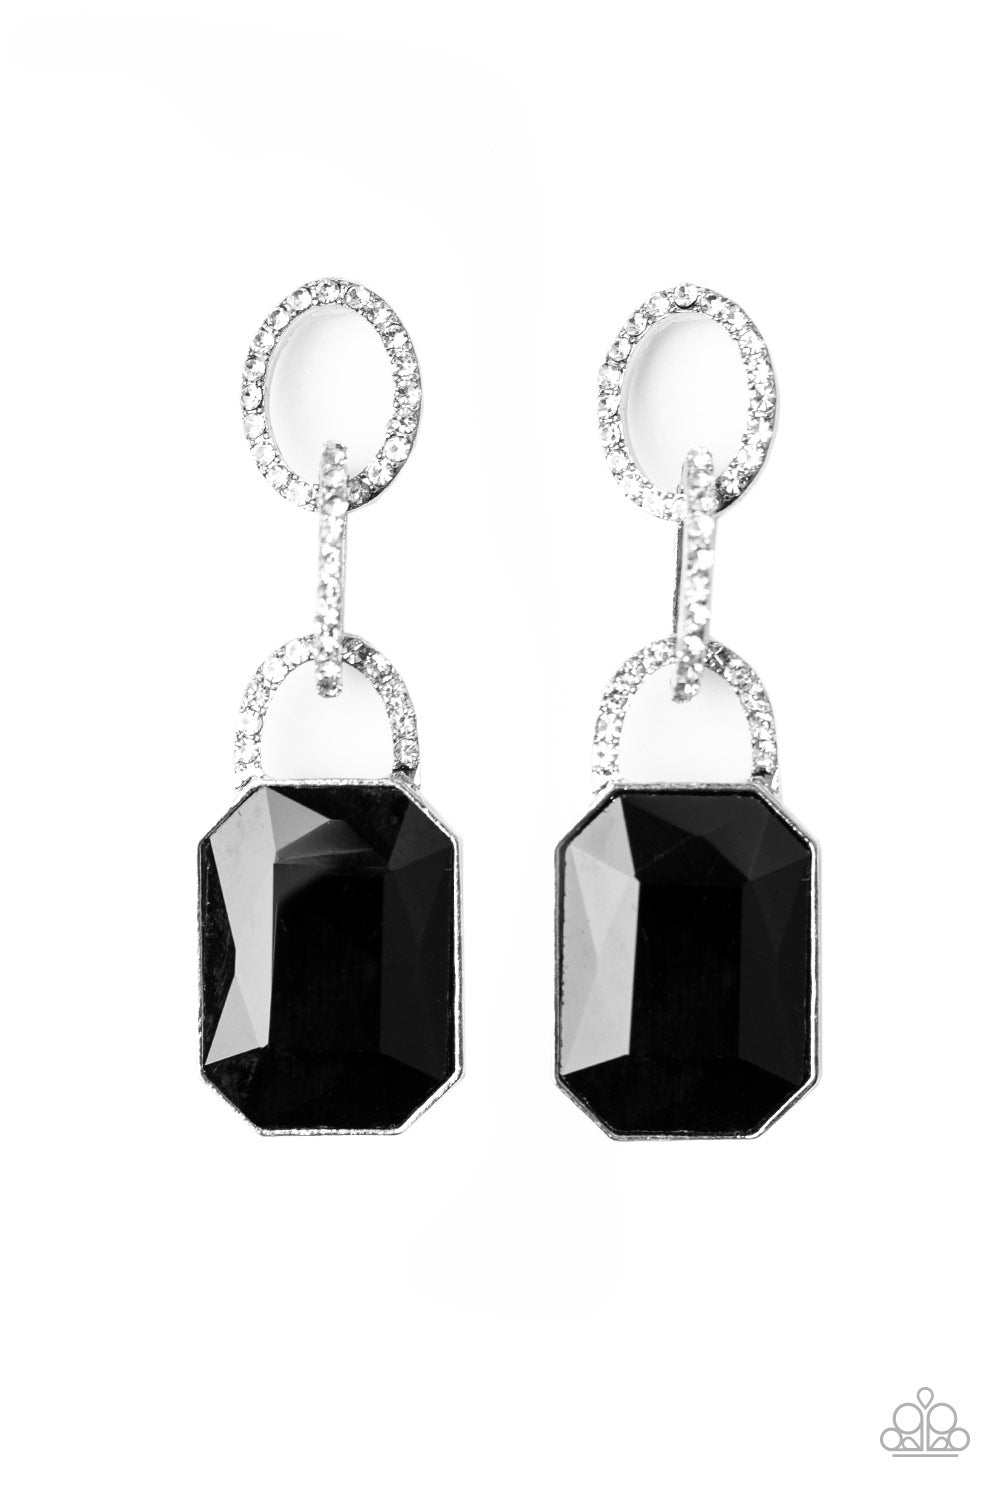 Paparazzi Superstar Status - Black Post Earrings - A Finishing Touch 